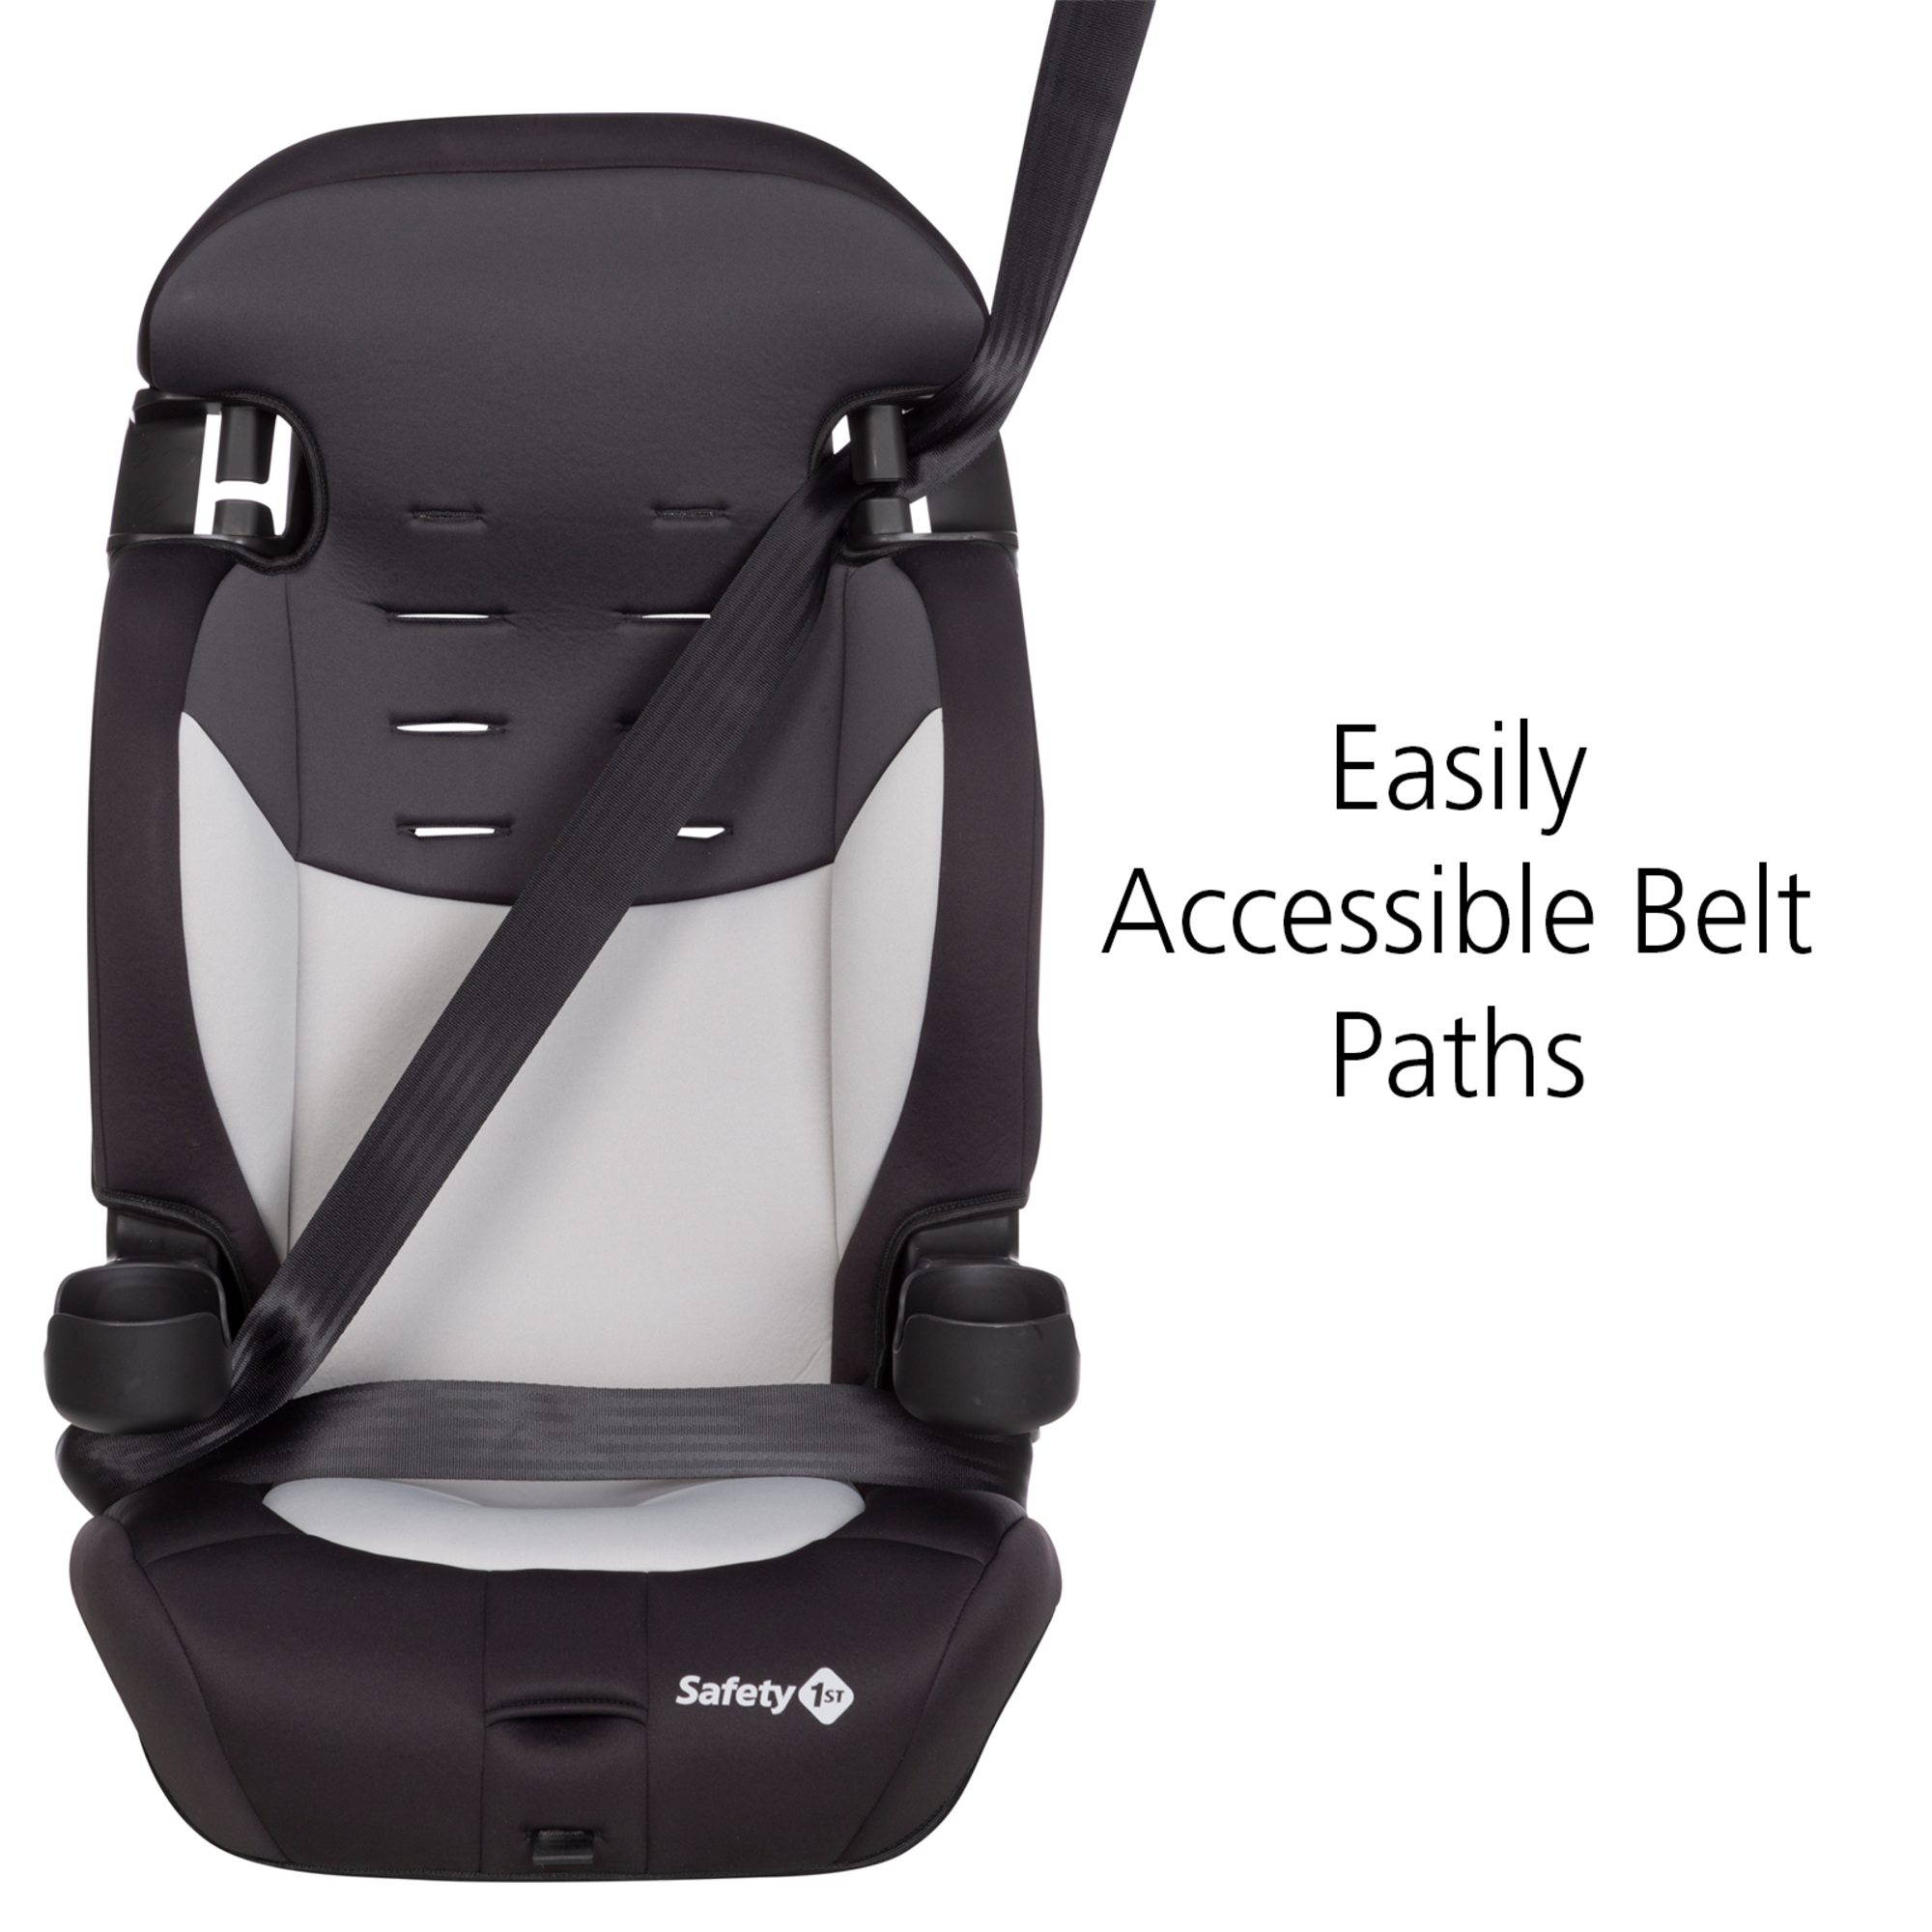 Safety 1st Grand 2-in-1 Booster Car Seat in Black Sparrow